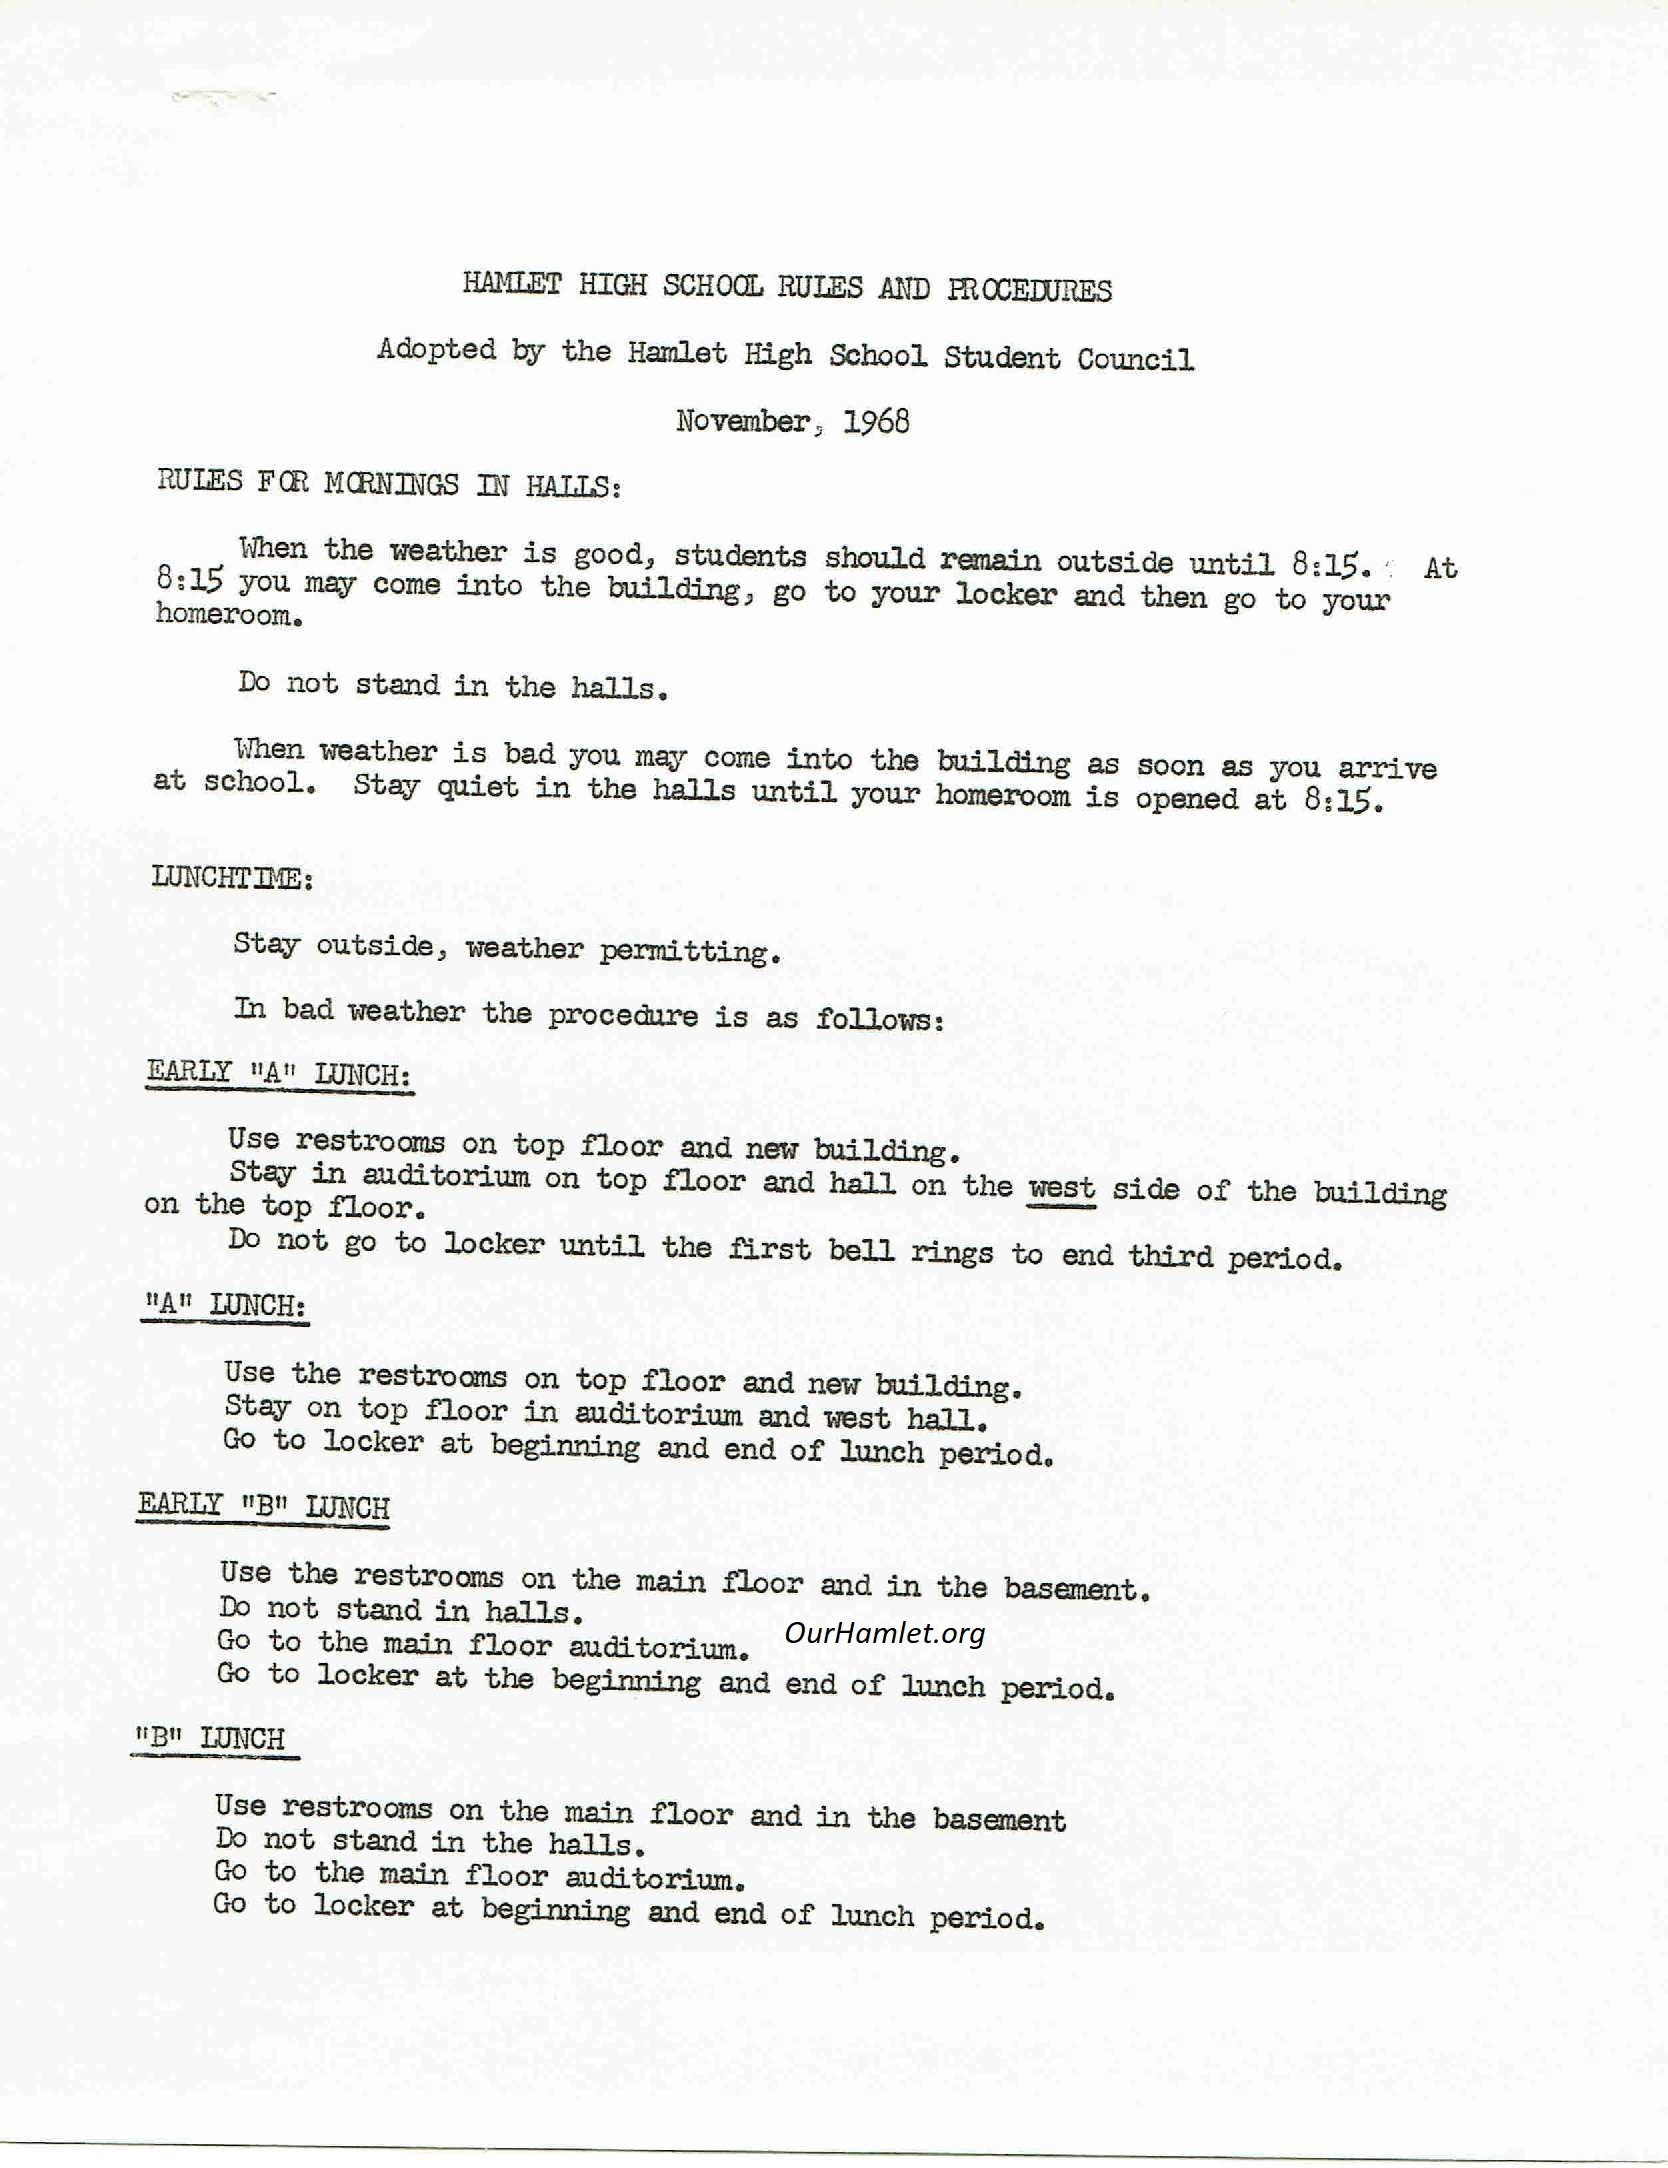 HHS Rules and Procedures 1968_1 OH.jpg